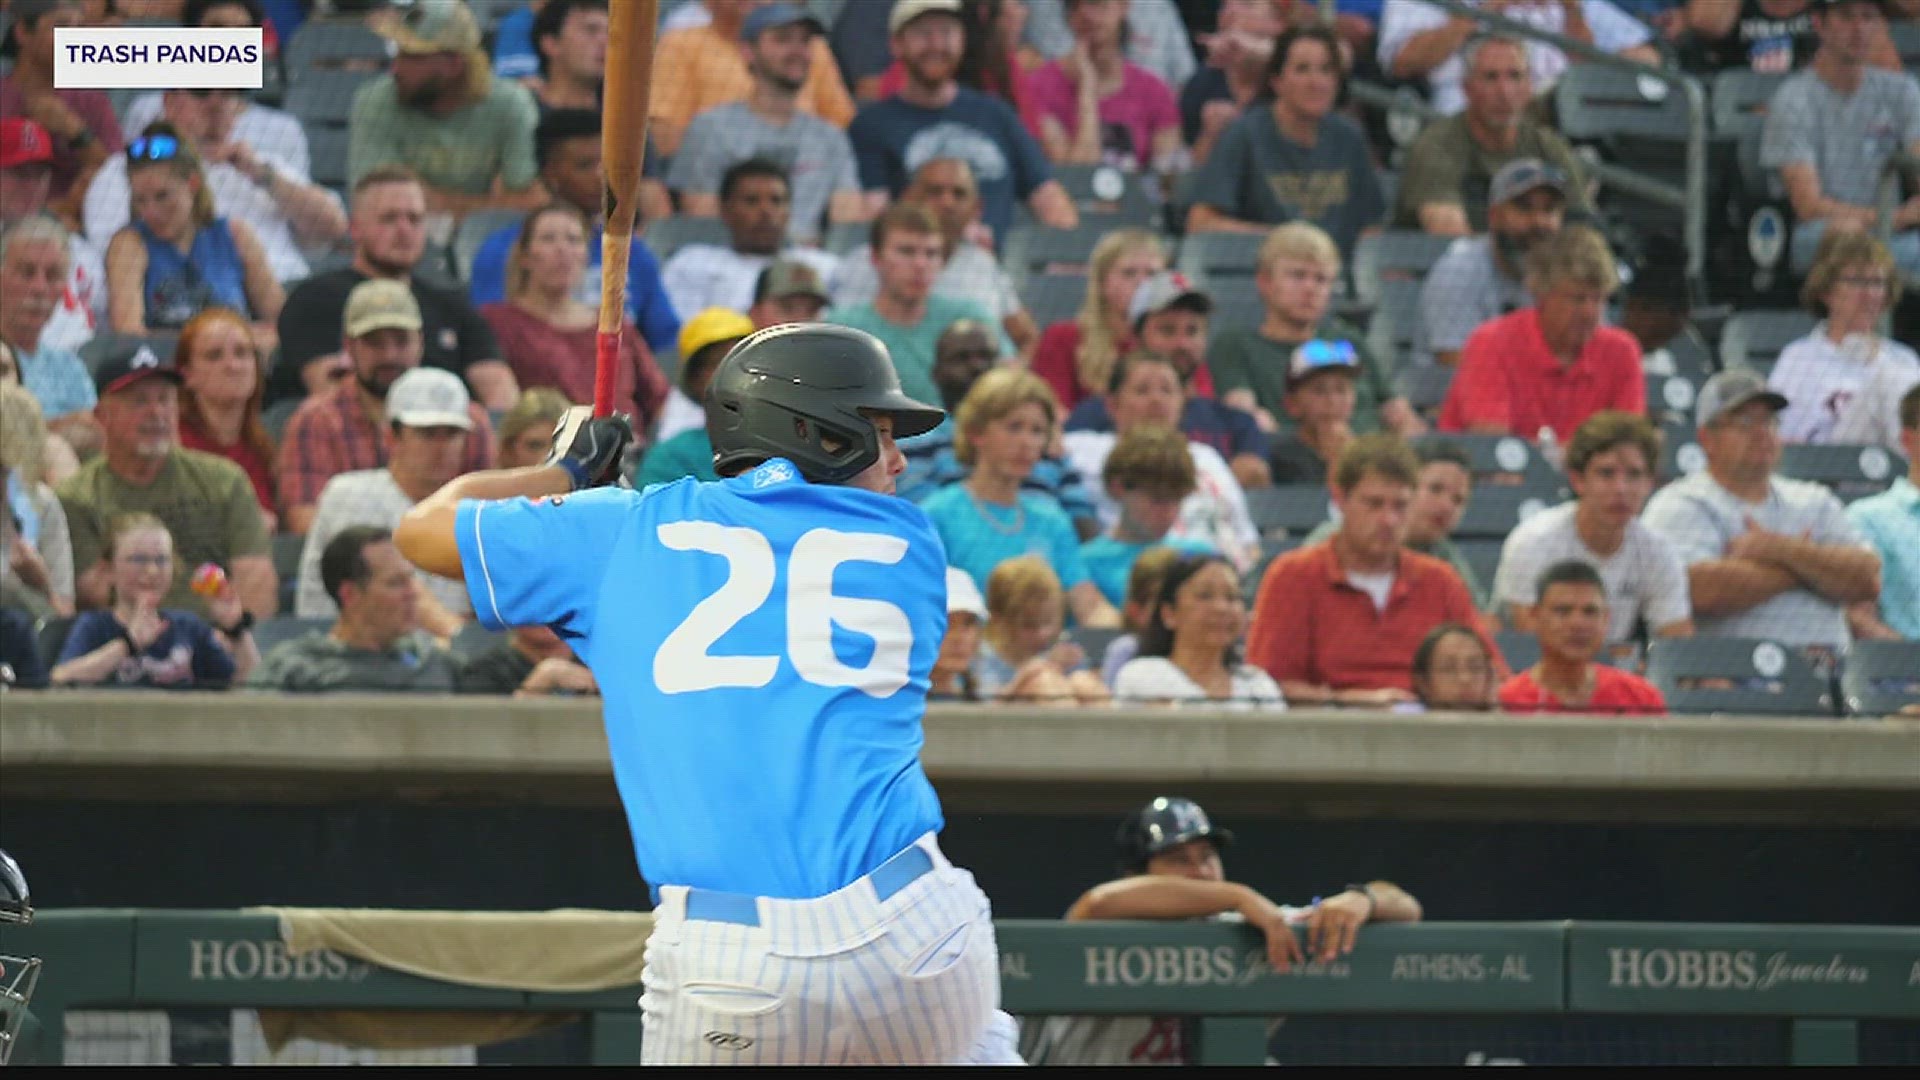 The Pandas finished with a 58-80 overall record in 2023. Eight Trash Pandas made their Major League debuts and the franchise led the Southern League in attendance.